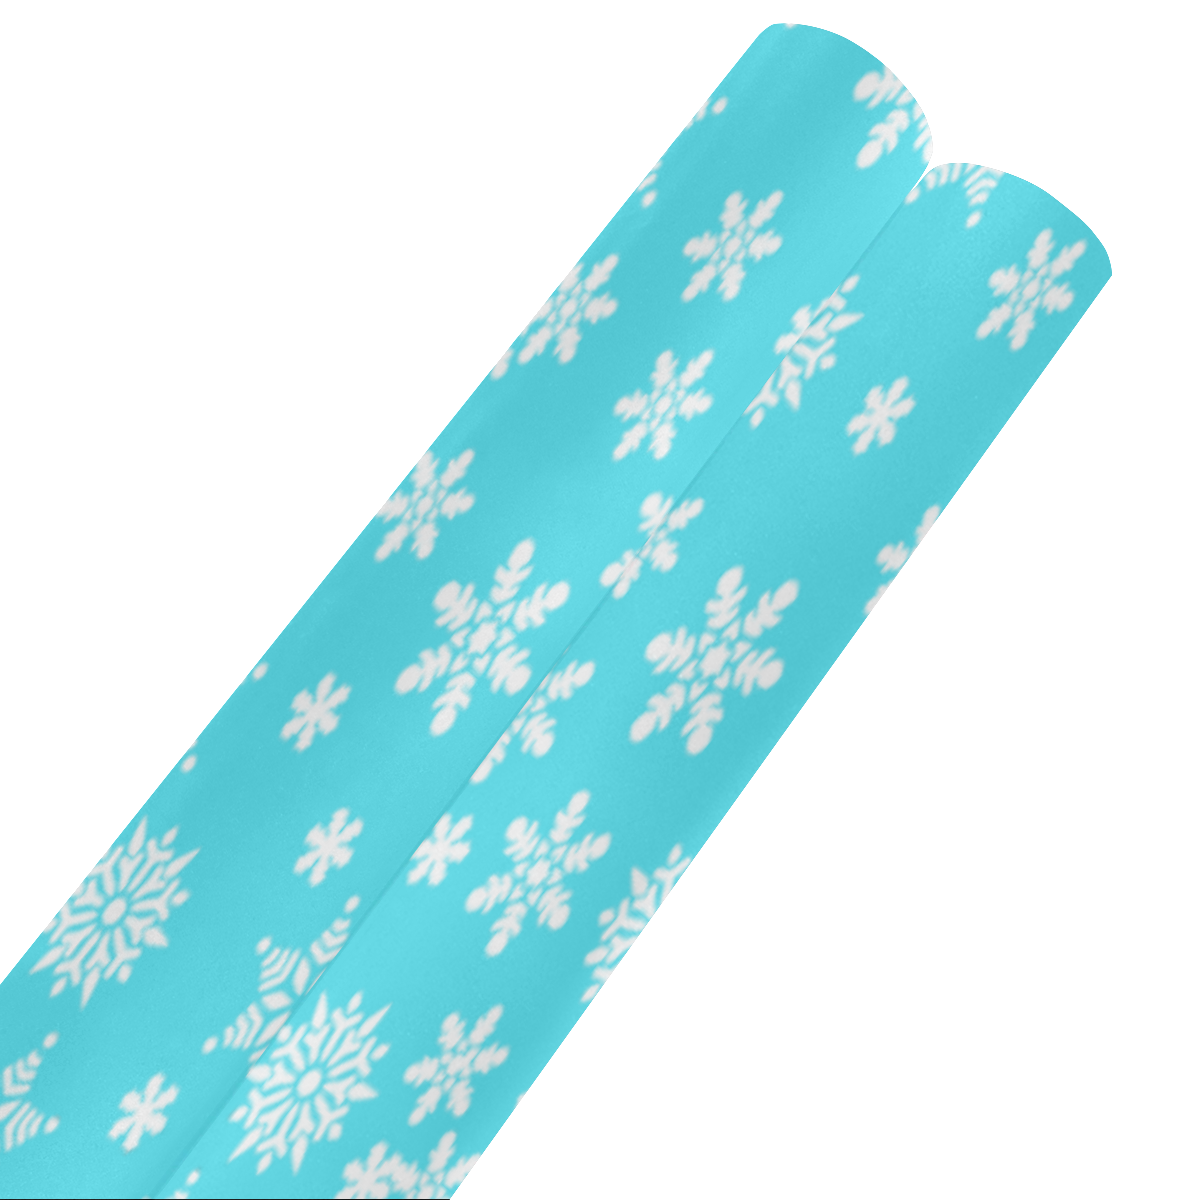 Christmas White Snowflakes on Turquoise Gift Wrapping Paper 58"x 23" (2 Rolls)